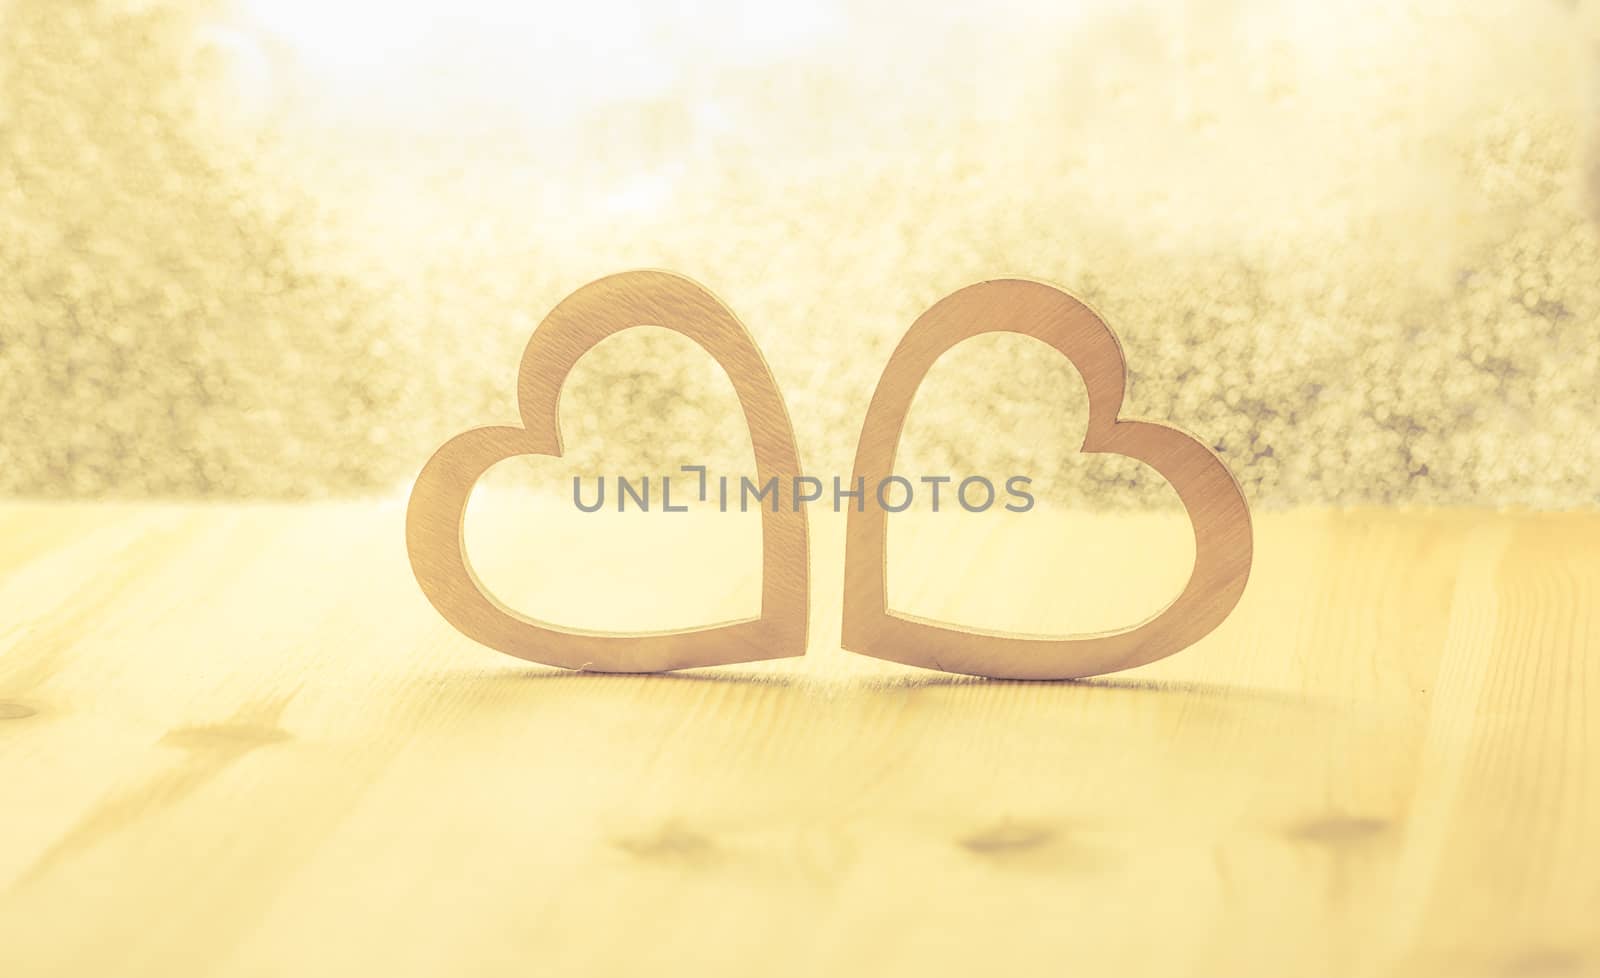 Romantic scenery with two hearts made from wood against a bright background